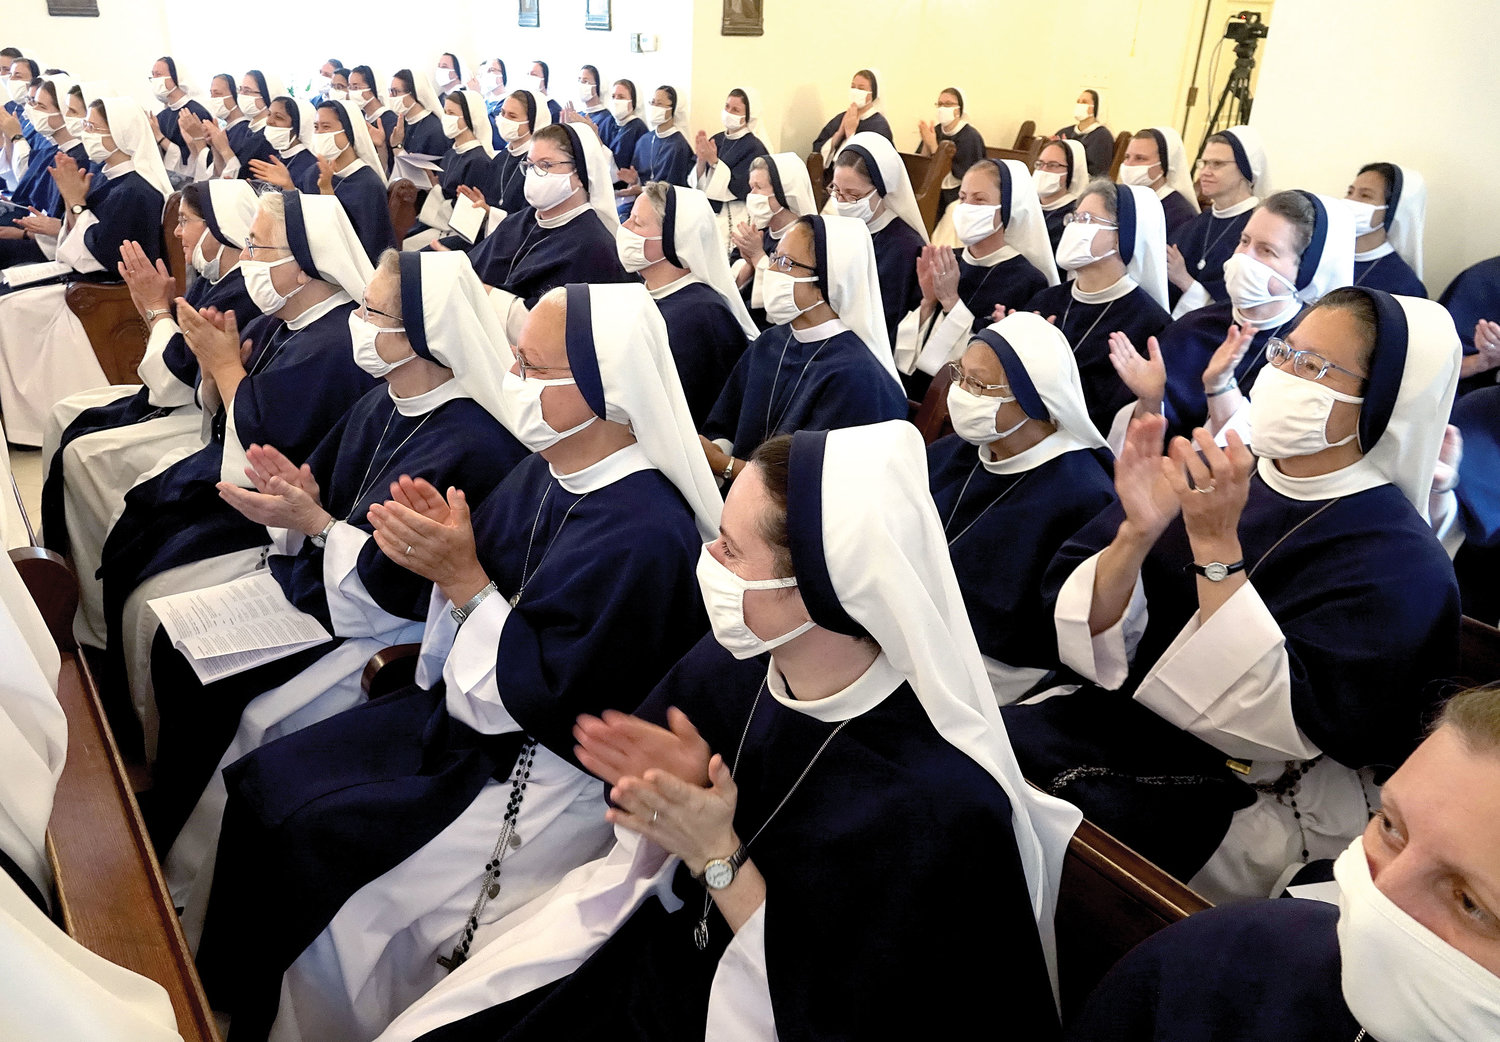 Members of the Sisters of Life applaud two of their own—Sister Virginia Joy, S.V. and Sister Naomi Maria Magnificat, S.V.—who professed solemn vows Aug. 6 in the Chapel of Mary, Mother of the Eucharist at the Sisters of Life Motherhouse, Annunciation in Suffern.